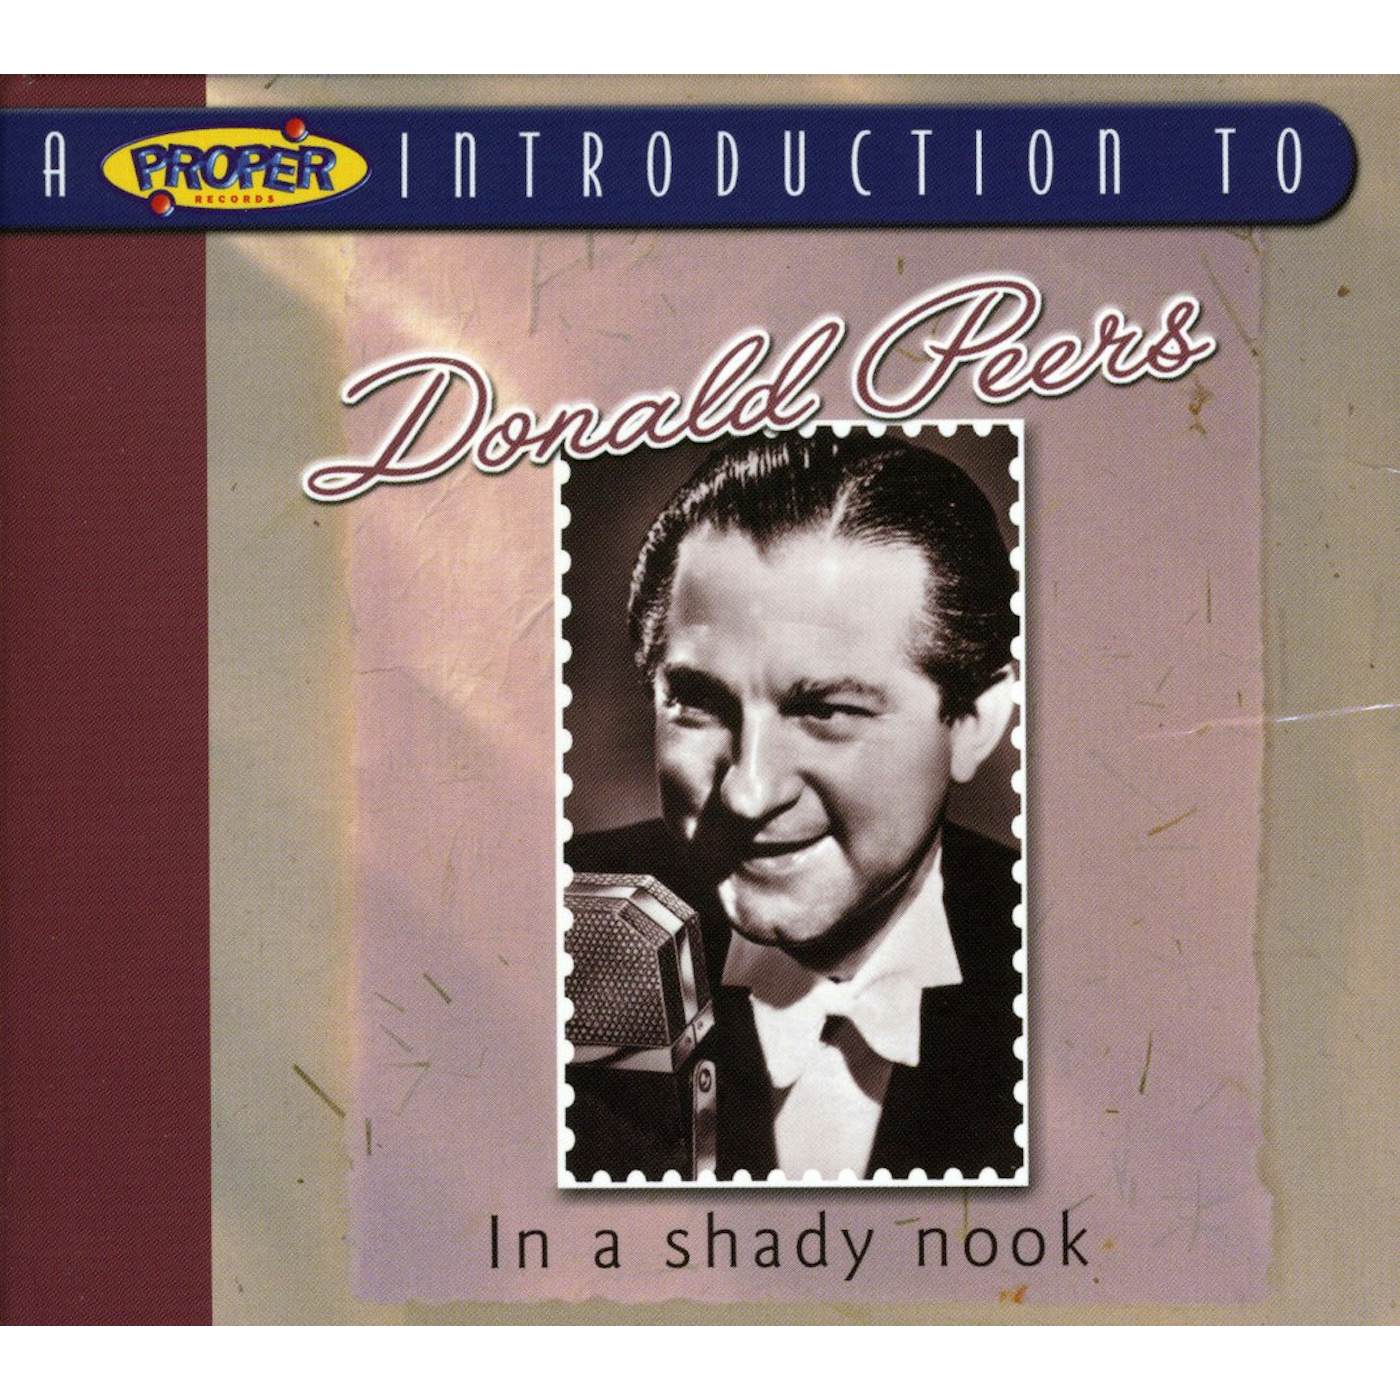 PROPER INTRODUCTION TO DONALD PEERS: IN SHADY NOOK CD